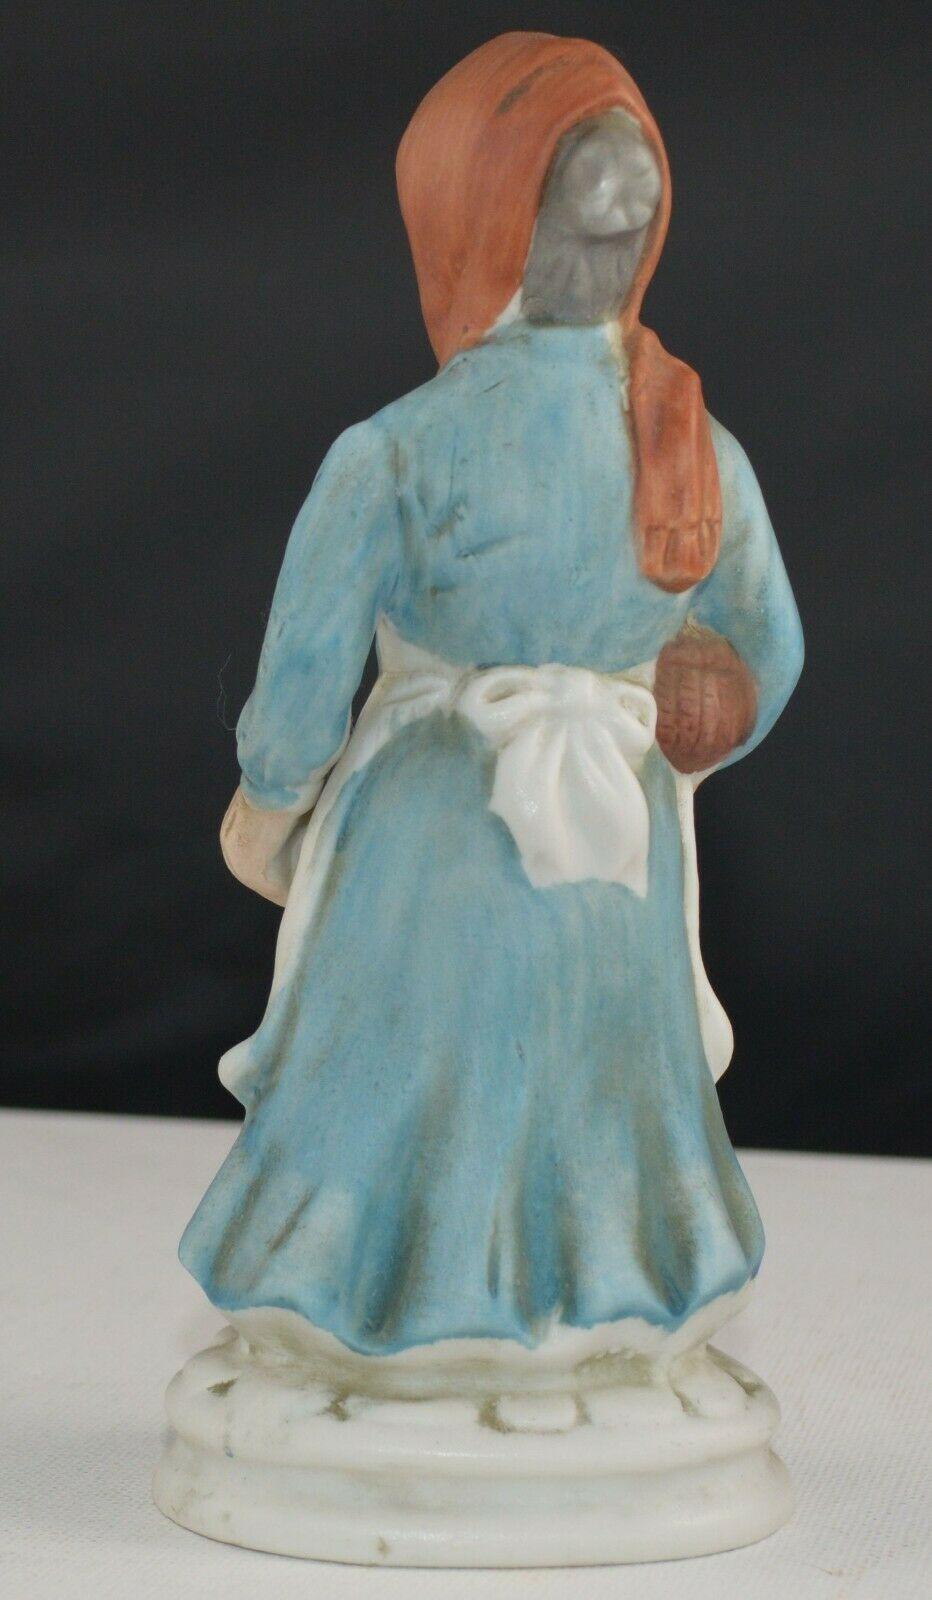 DECORATIVE FIGURINES LADY WEARING A RED HEAD SCARF & MAN WEARING A BLACK HAT(PREVIOUSLY OWNED) GOOD CONDITION - TMD167207